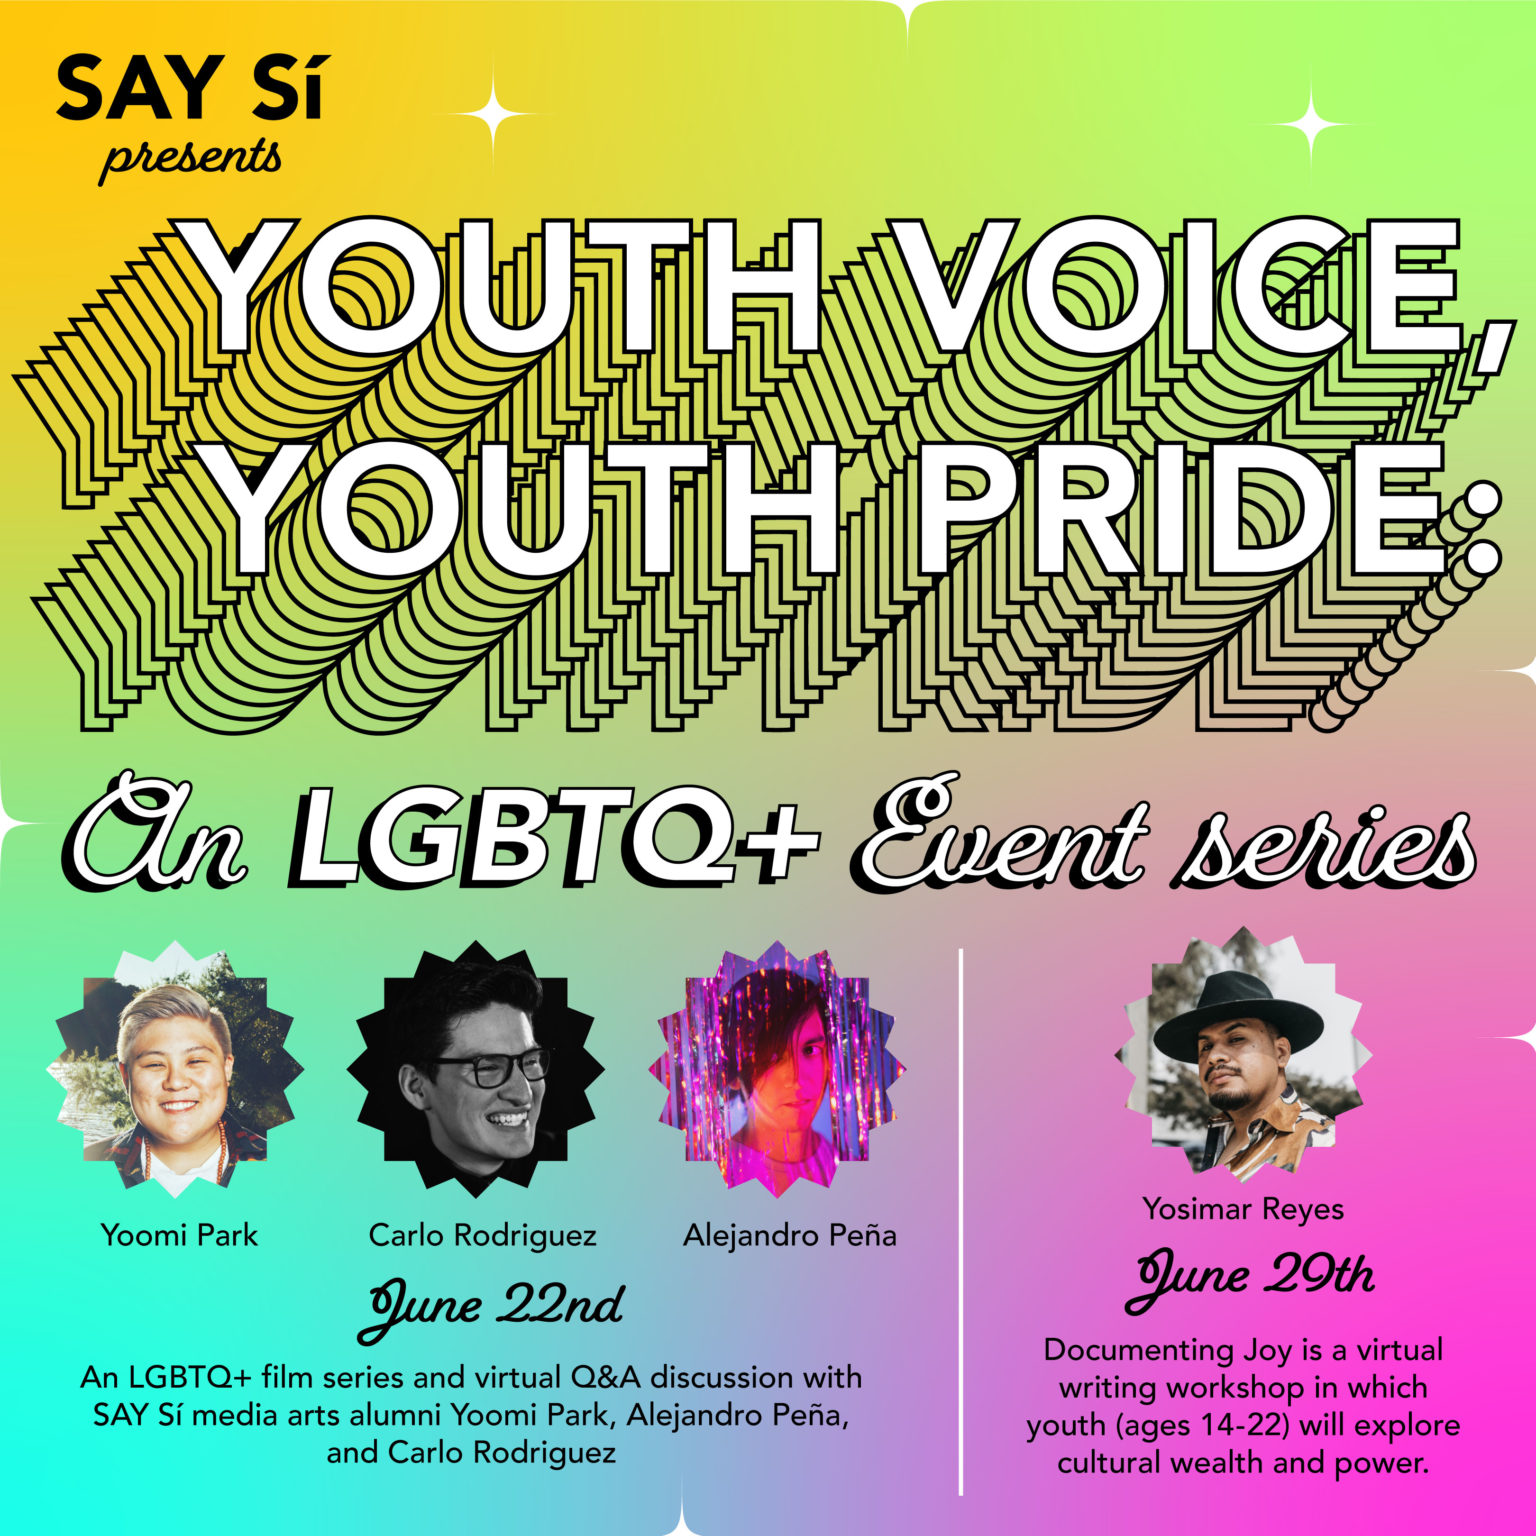 SAY Sí Presents, Youth Voice, Youth Pride An LGBTQ+ Event Series SAY Sí